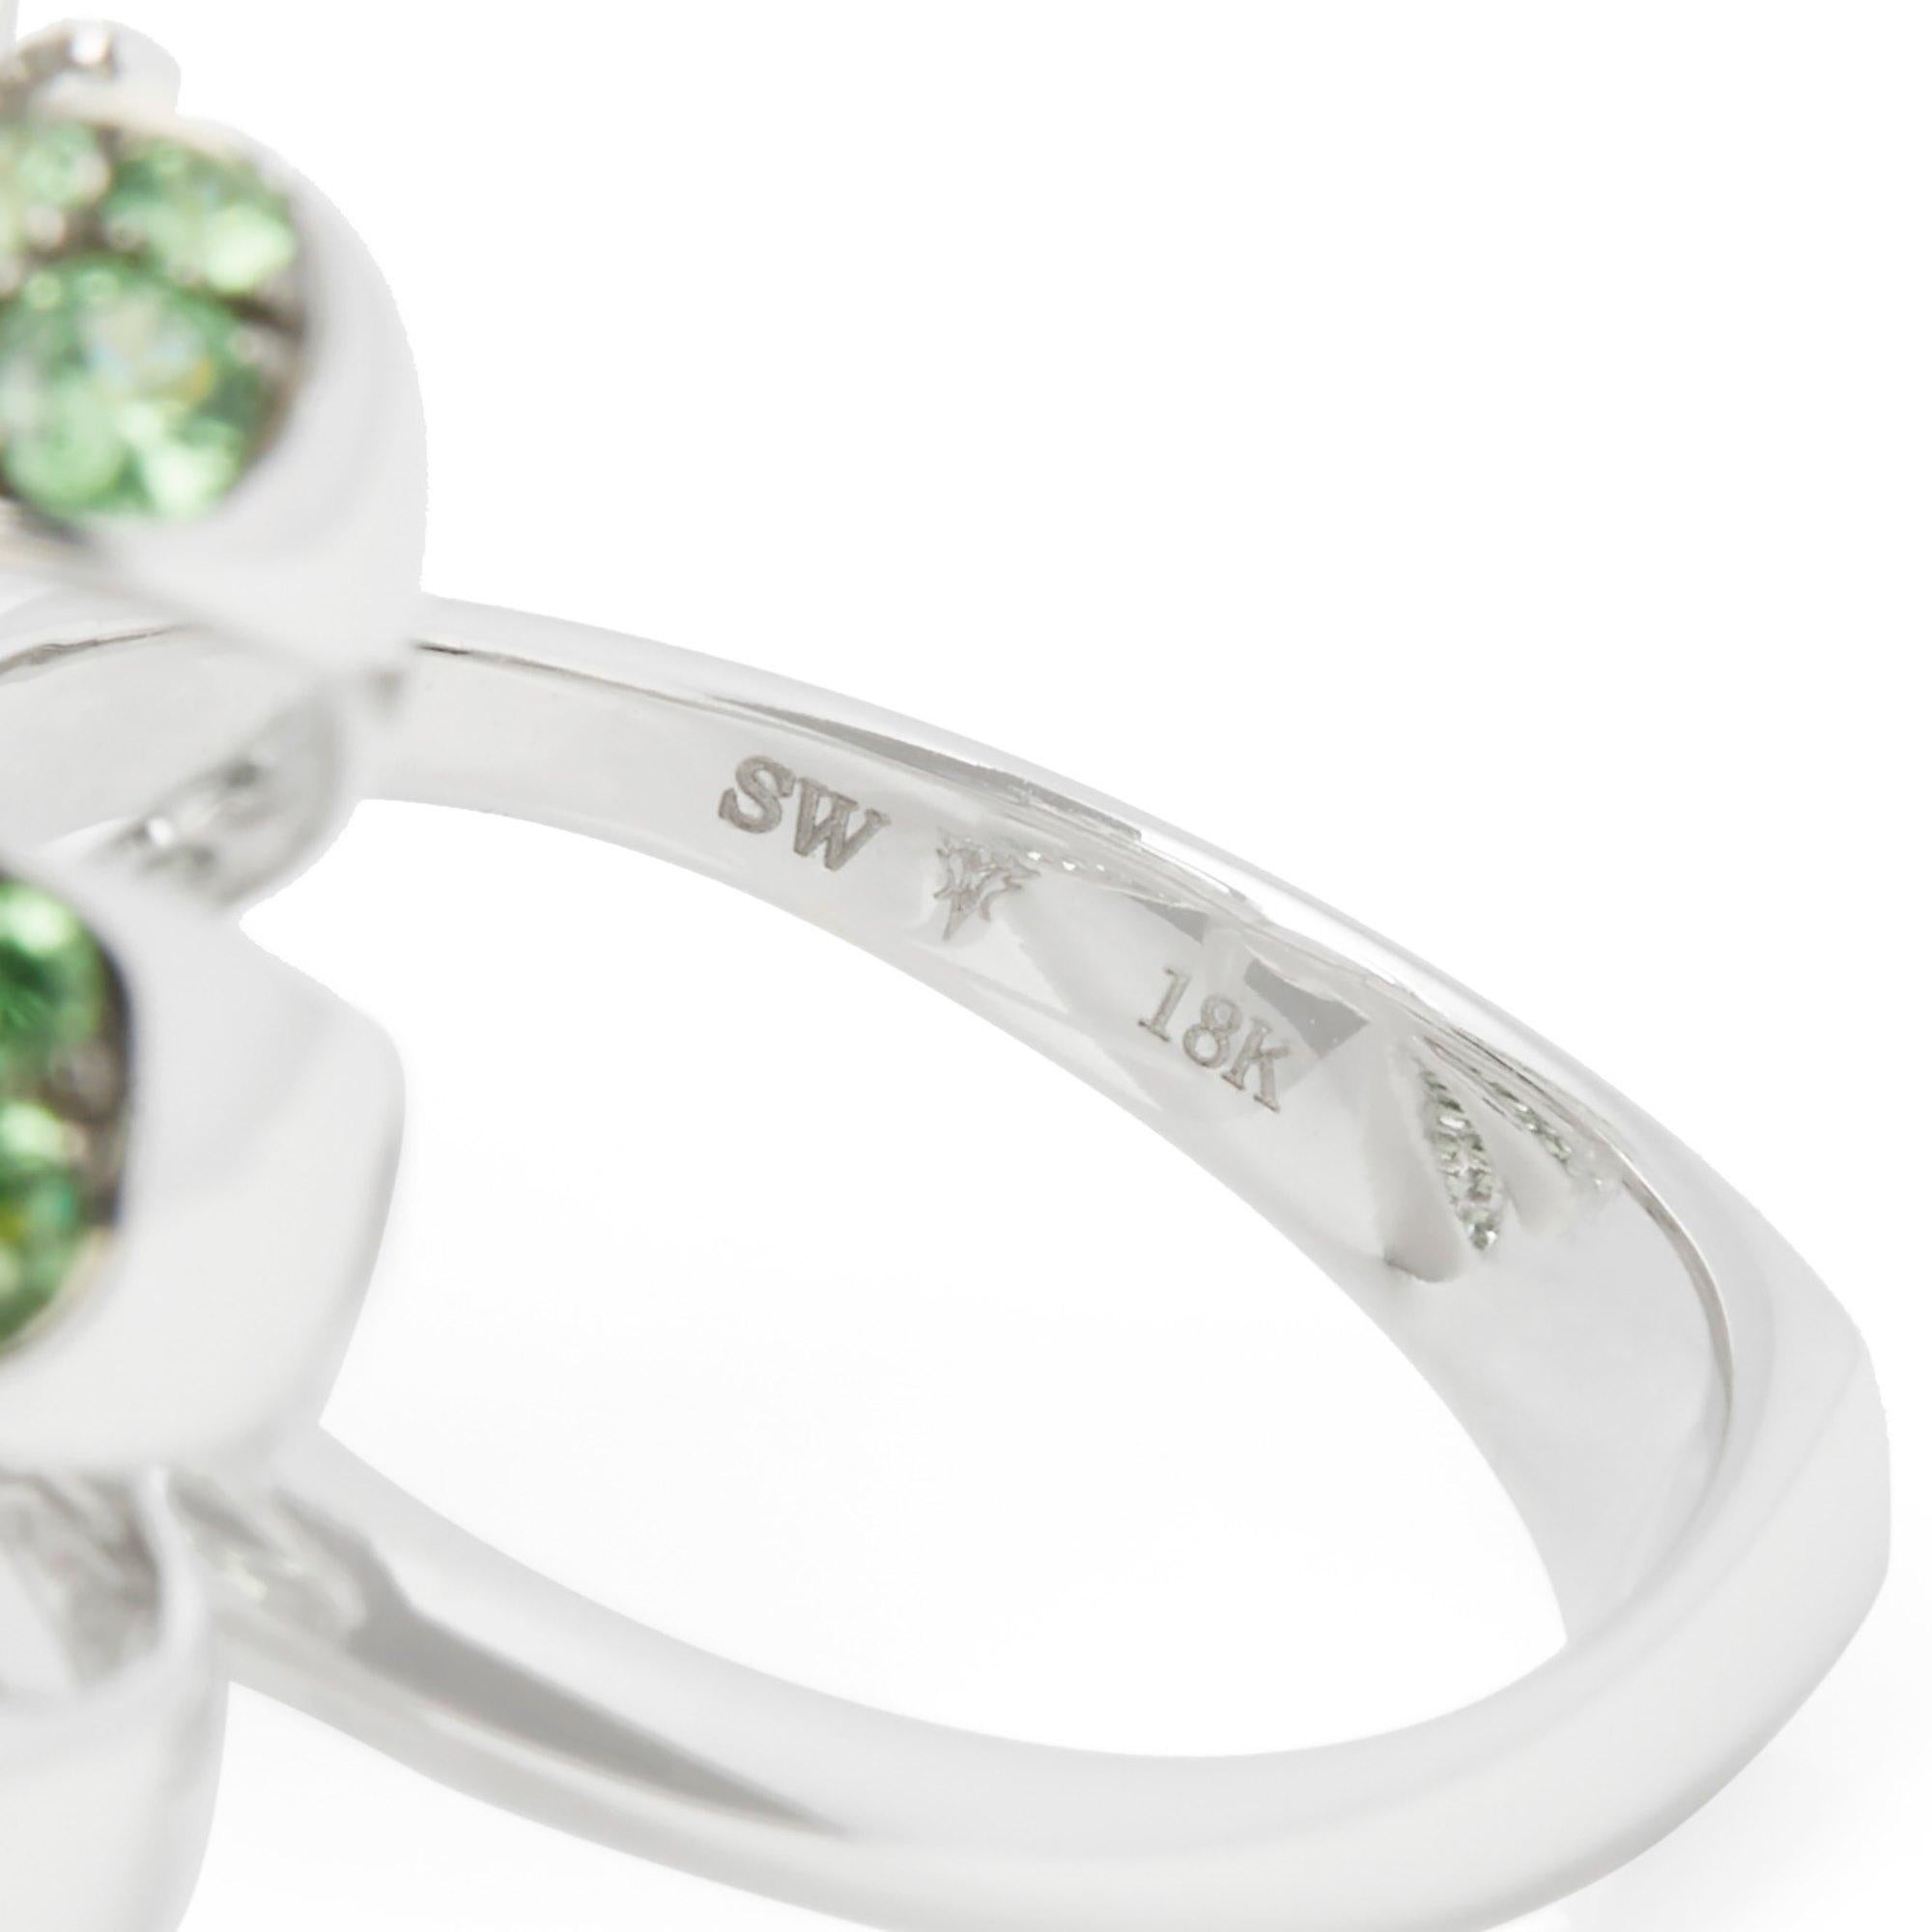 Forget me Not 18 Carat White Gold Pave Tsavorite Bow Ring In Excellent Condition For Sale In Bishop's Stortford, Hertfordshire